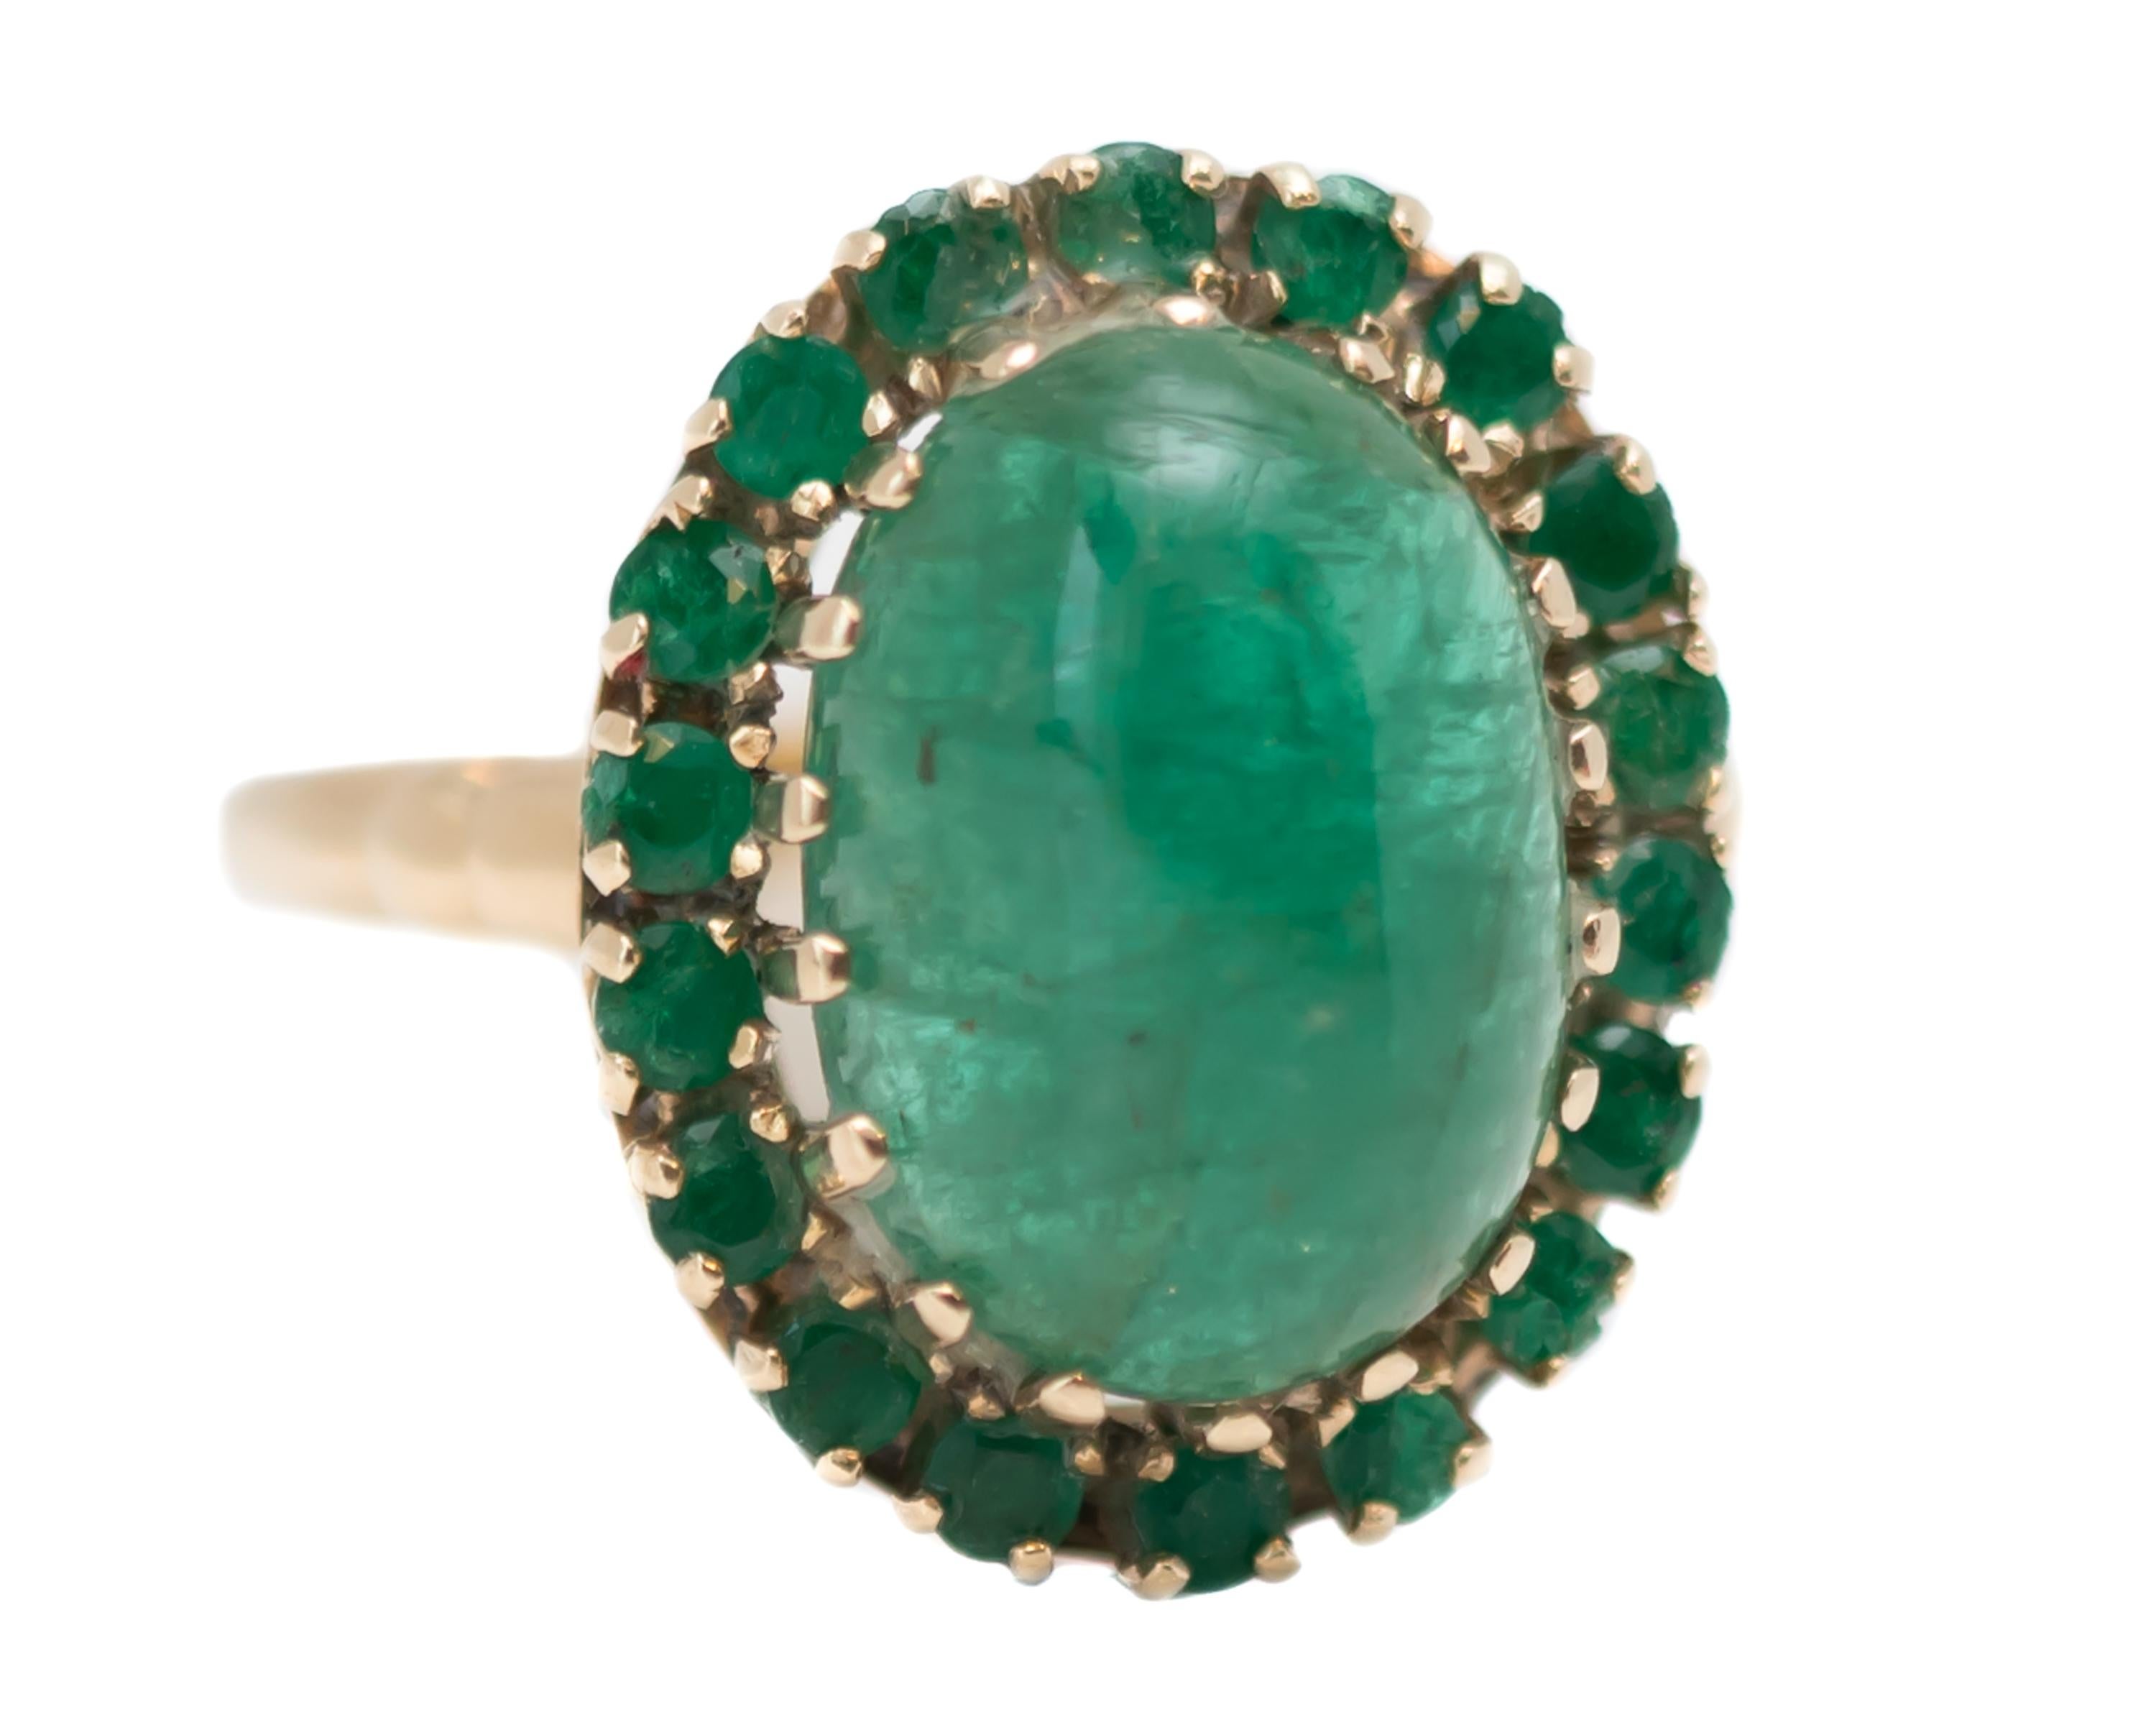 1960s Emerald Cabochon with Emerald Halo Ring - 14 Karat Yellow Gold, Emeralds

Features:
Oval Emerald Cabochon center stone
Emerald Halo
14 Karat Yellow Gold
18-Prong set, Elevated center stone
Prong set side stones

Finger to top of stone measures